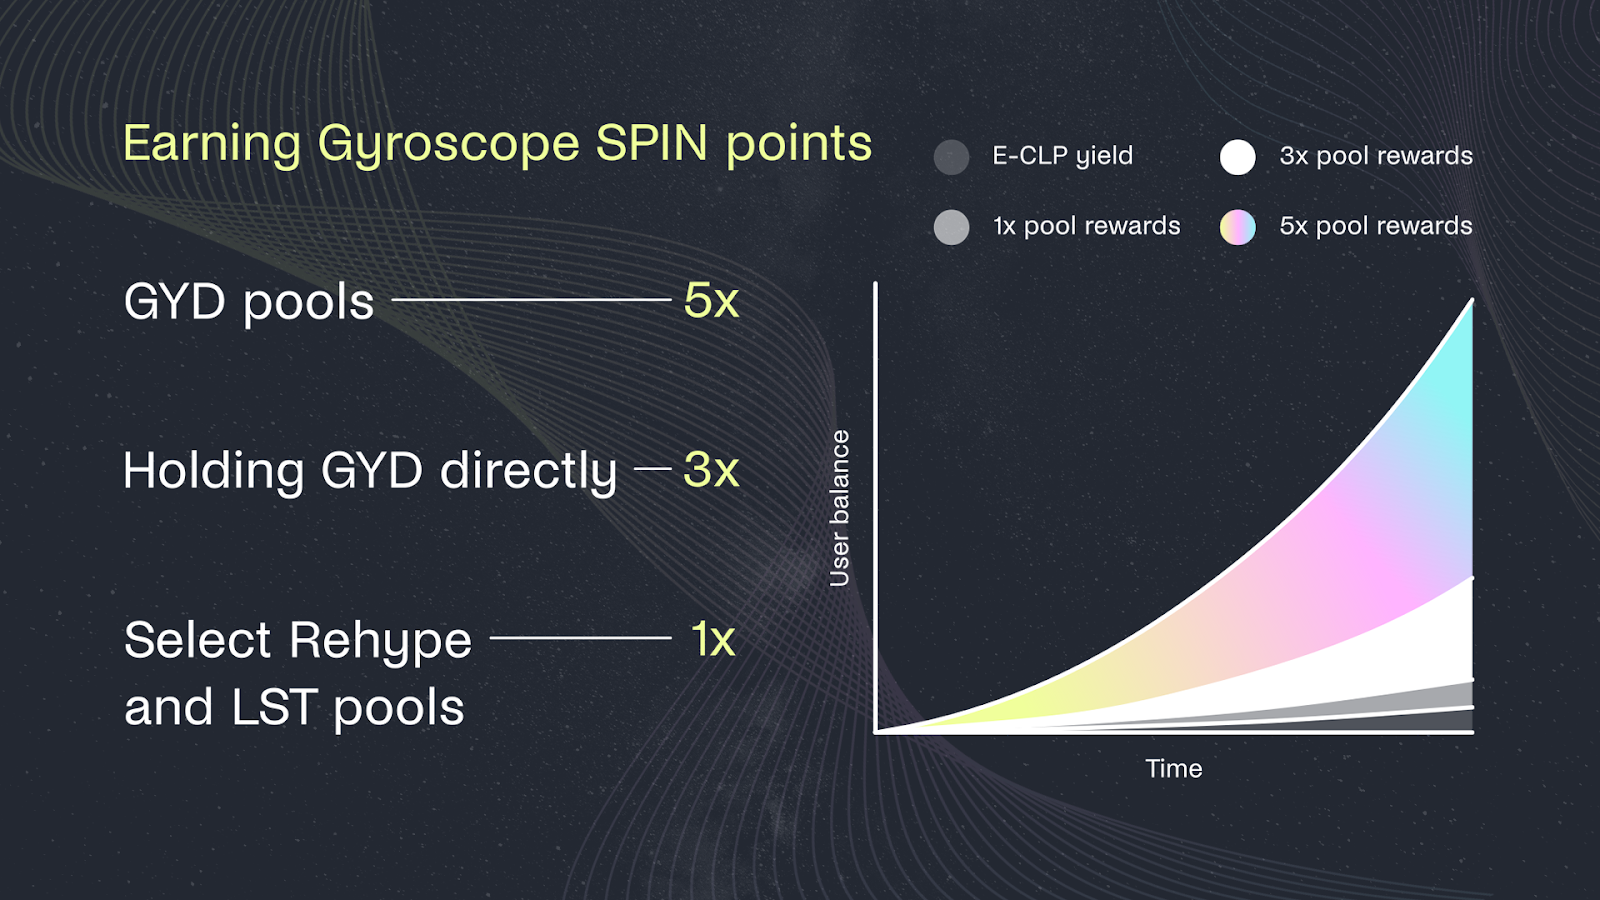 Cover Image for Launching the Gyroscope SPIN program + New ‘Rehype’ Liquidity Pools